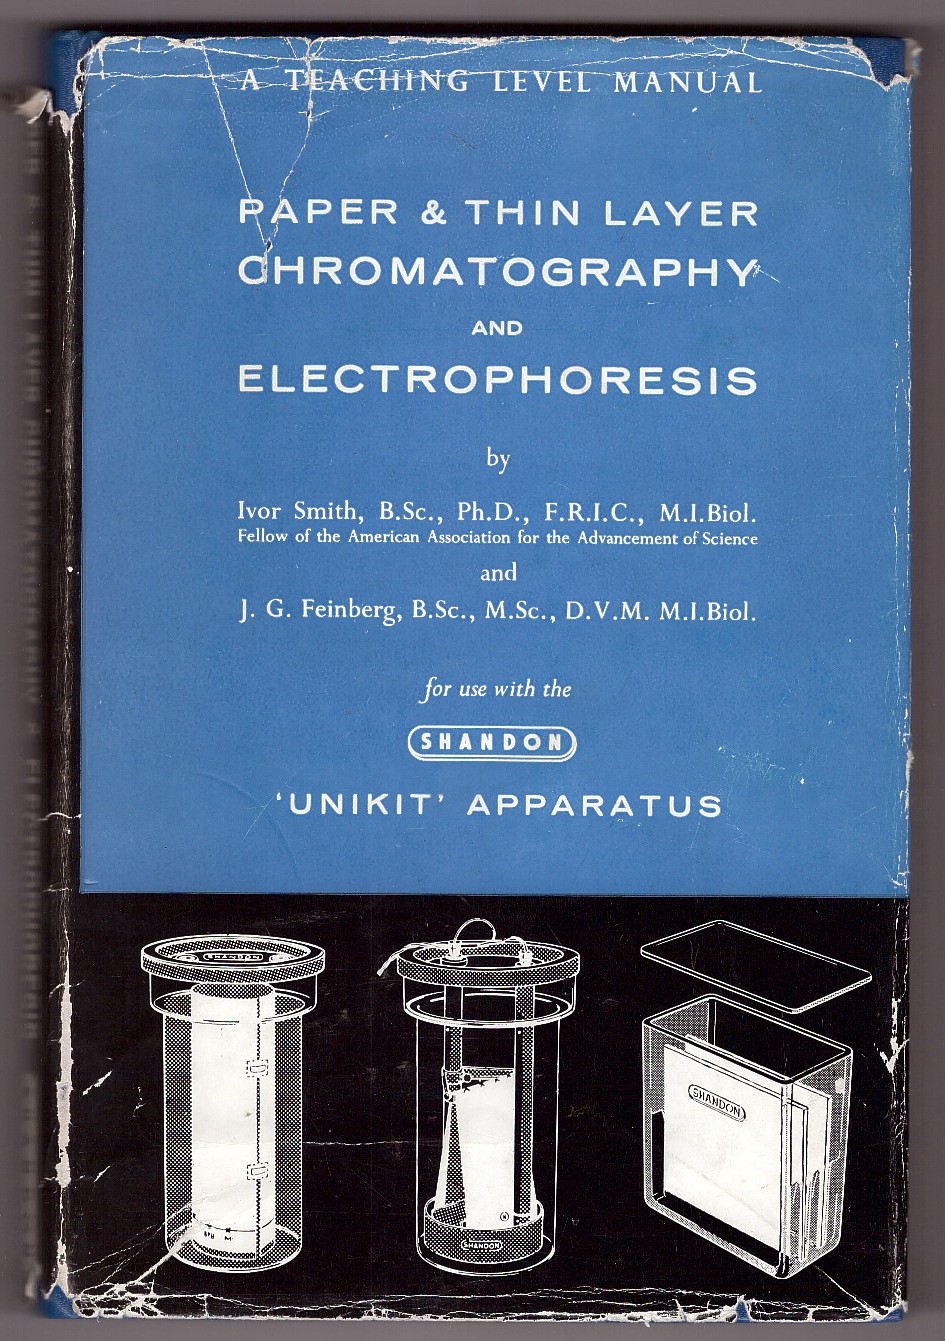 SMITH, IVOR & FEINBERG, J. G. - Paper & Thin Layer Chromatography and Electrophoresis a Teaching Level Manual